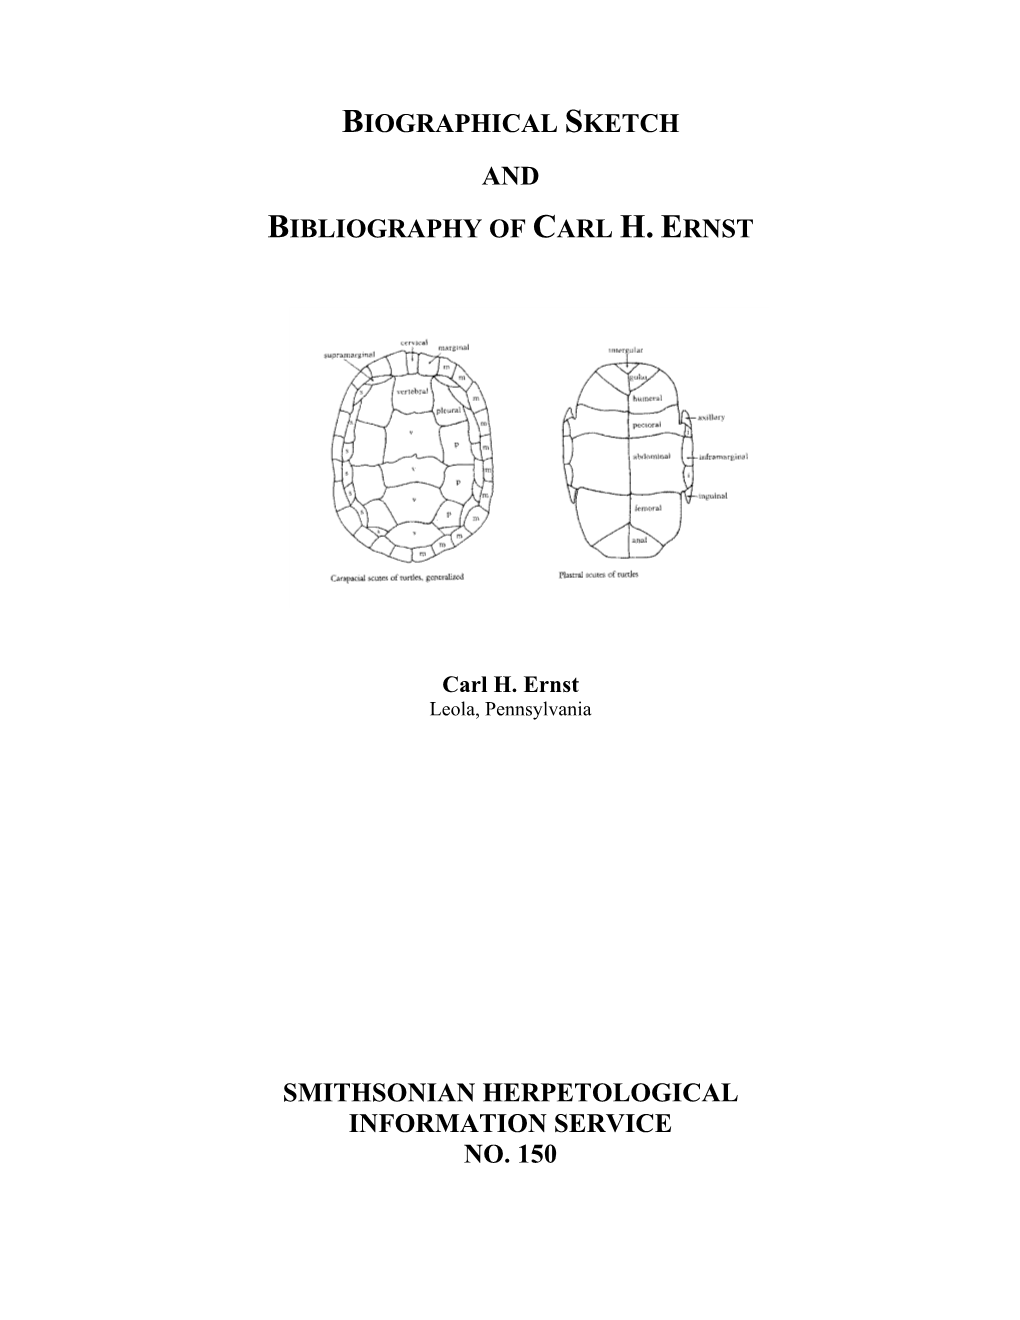 Biographical Sketch and Bibliography of Carl H